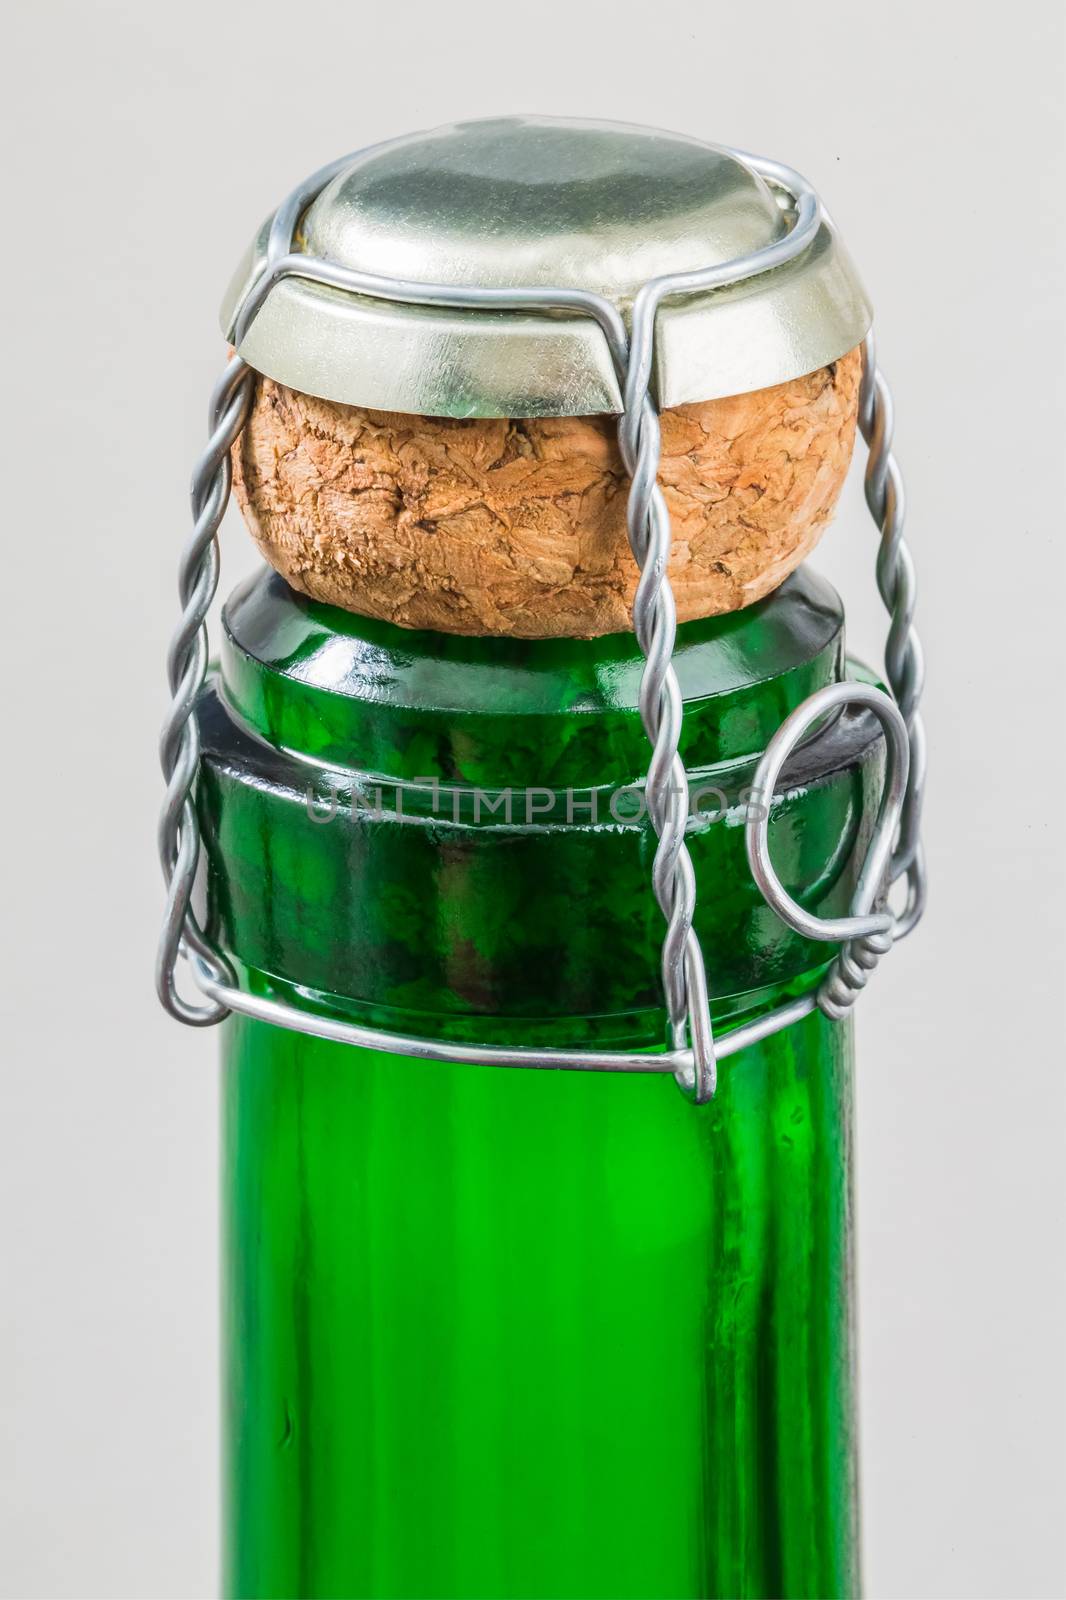 Top of champagne bottle on a white background